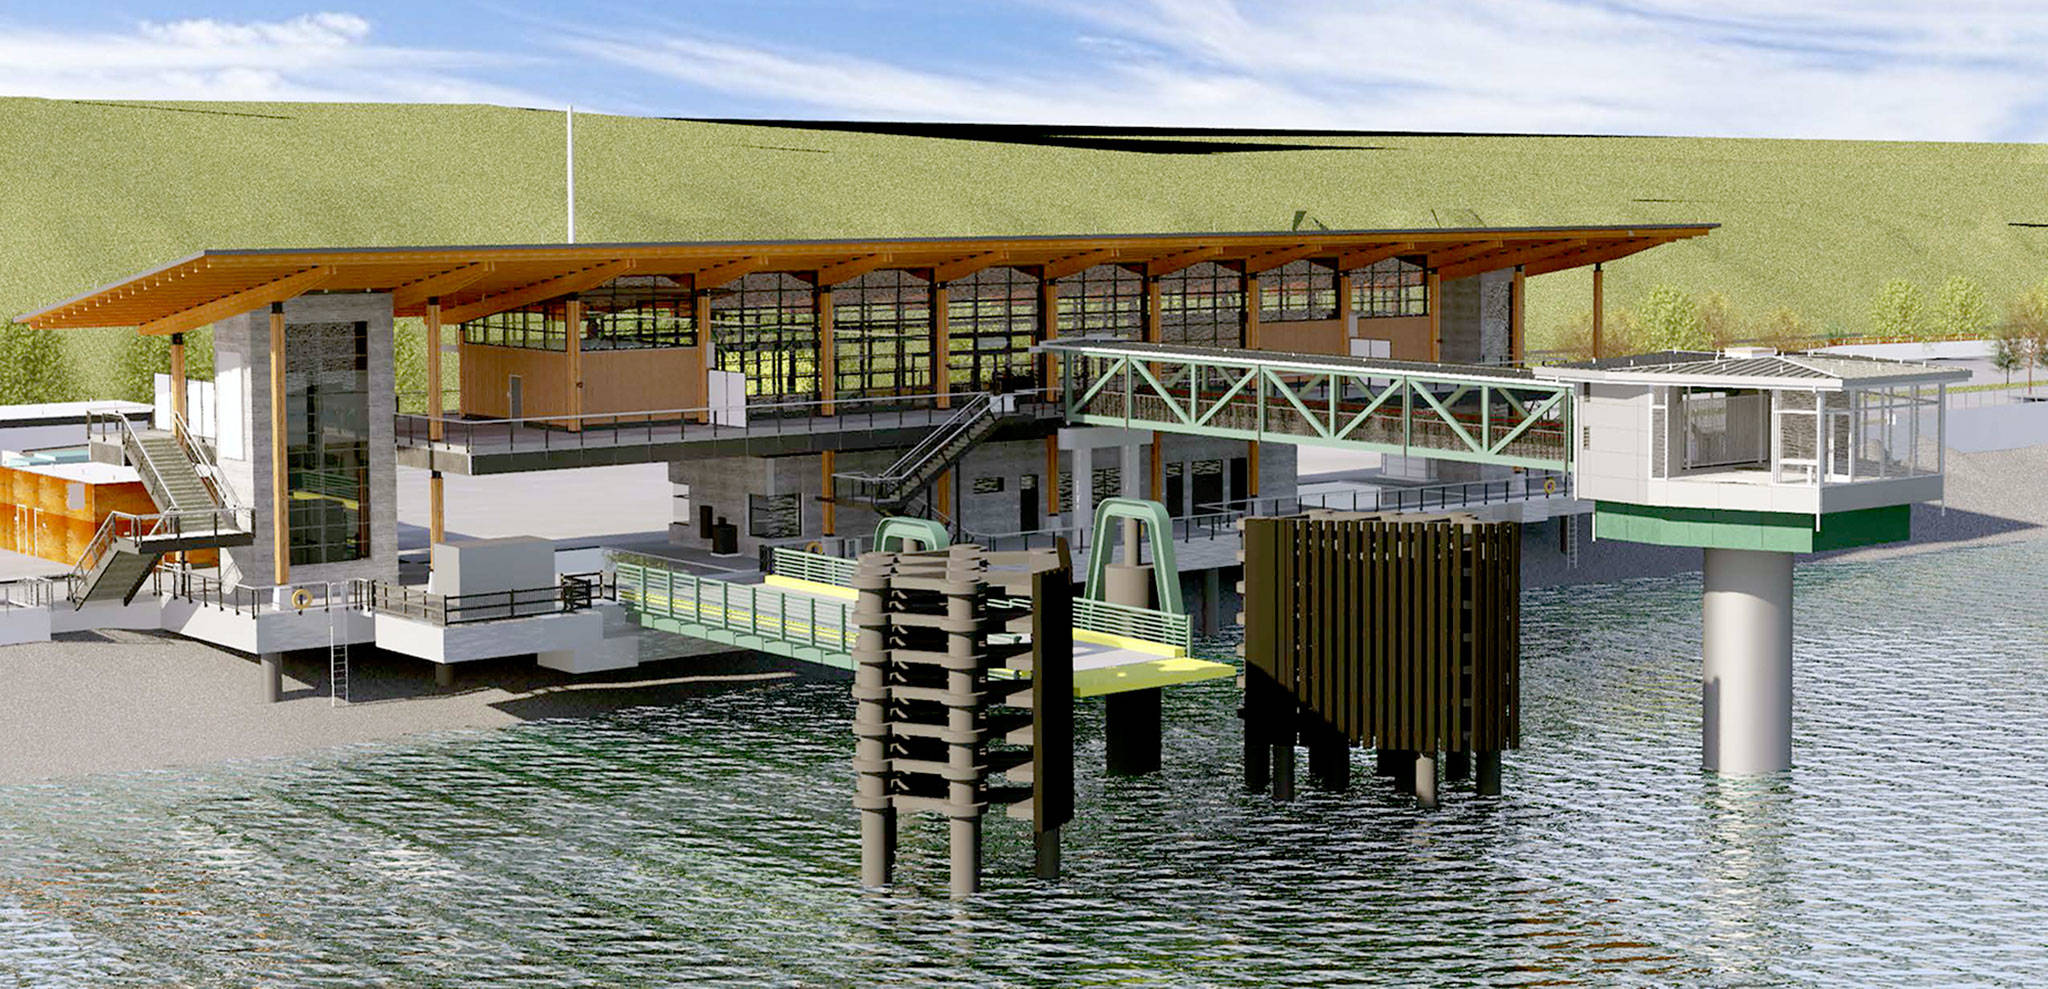 An artist’s rendering of the new ferry terminal under construction in Mukilteo. (Washington State Department of Transportation)